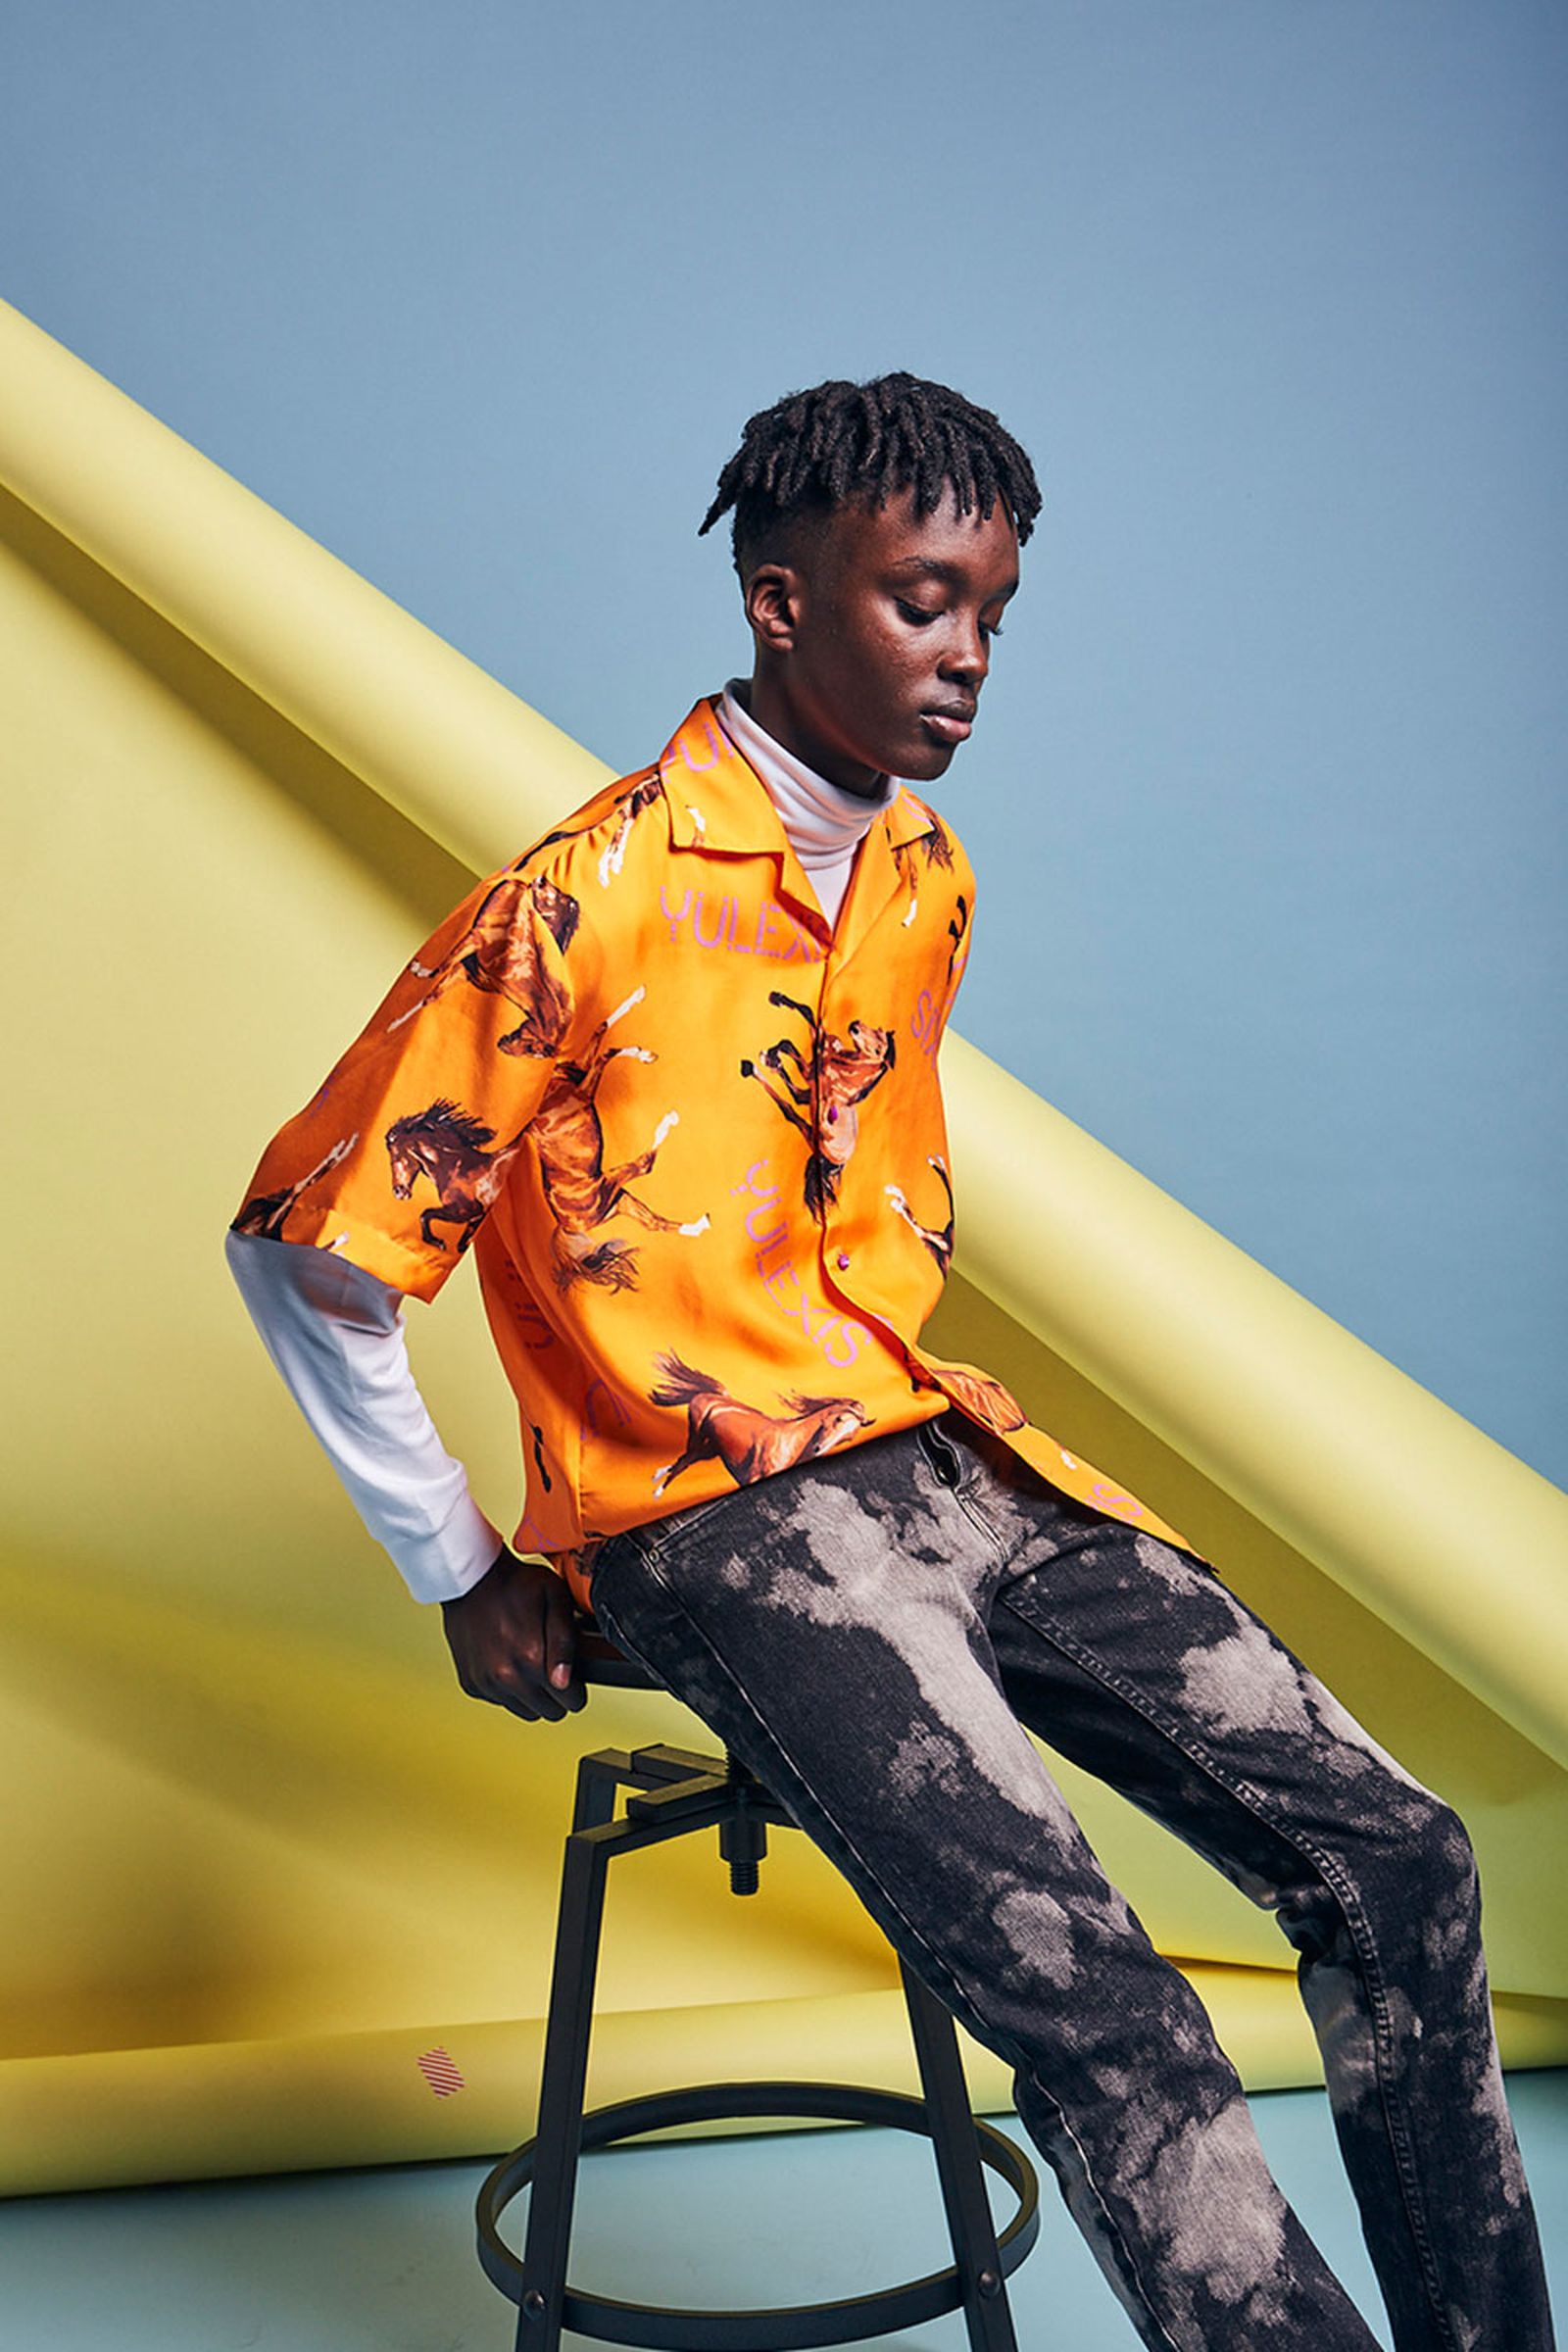 Yulexis' SS19 Lookbook Will Make You Want To Quit Your Day Job